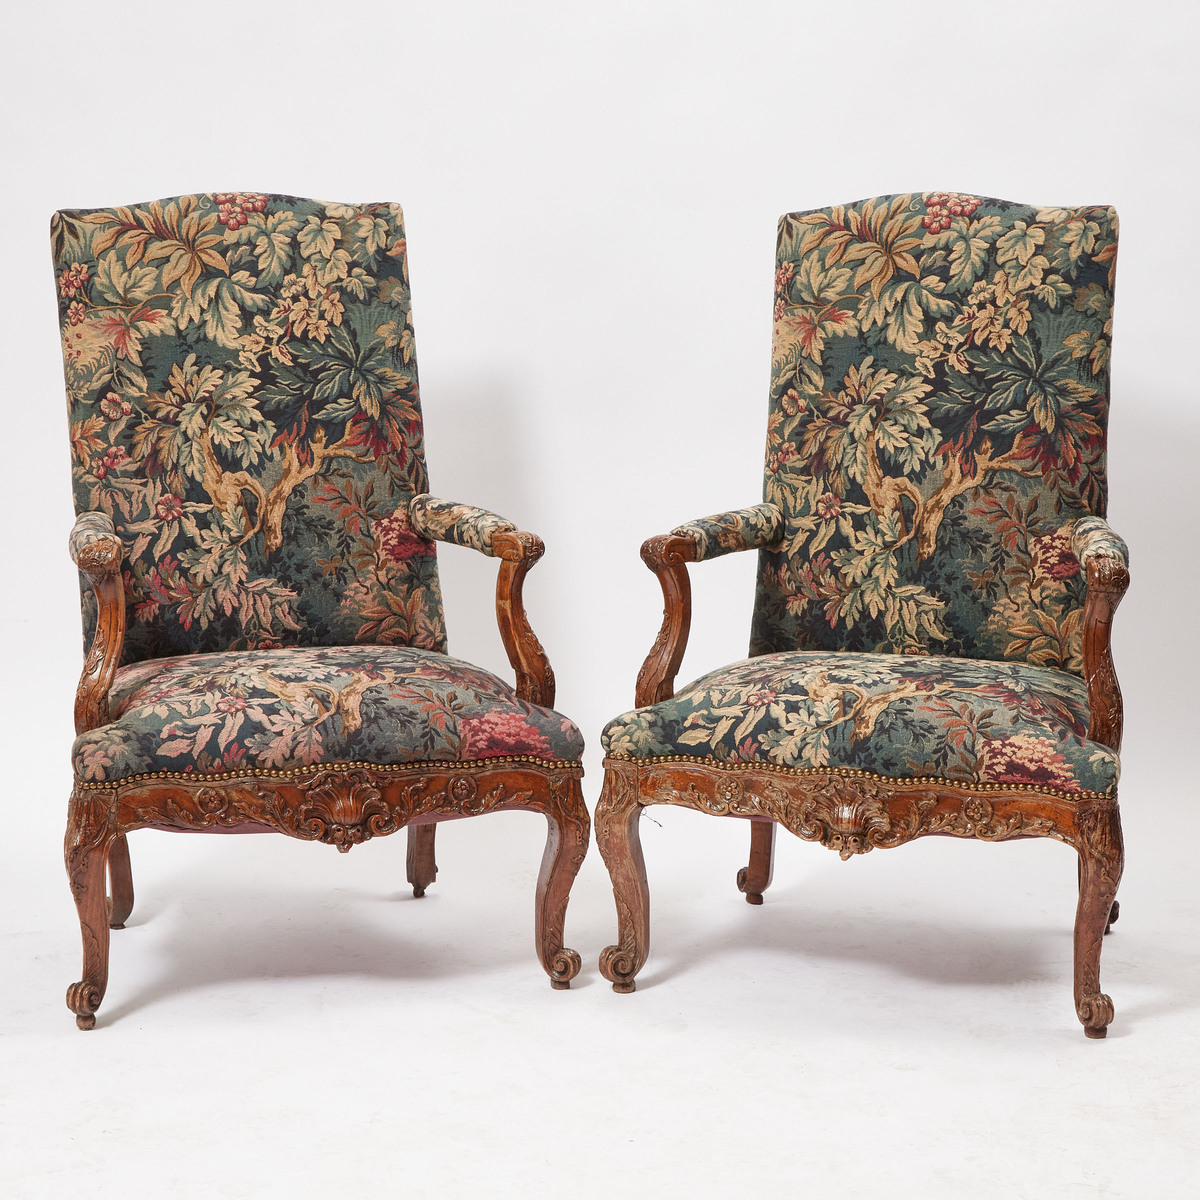 Pair of Early Louis XV Carved Walnut Fauteuils, c.1740, 44 x 28.5 x 28 in — 111.8 x 72.4 x 71.1 cm